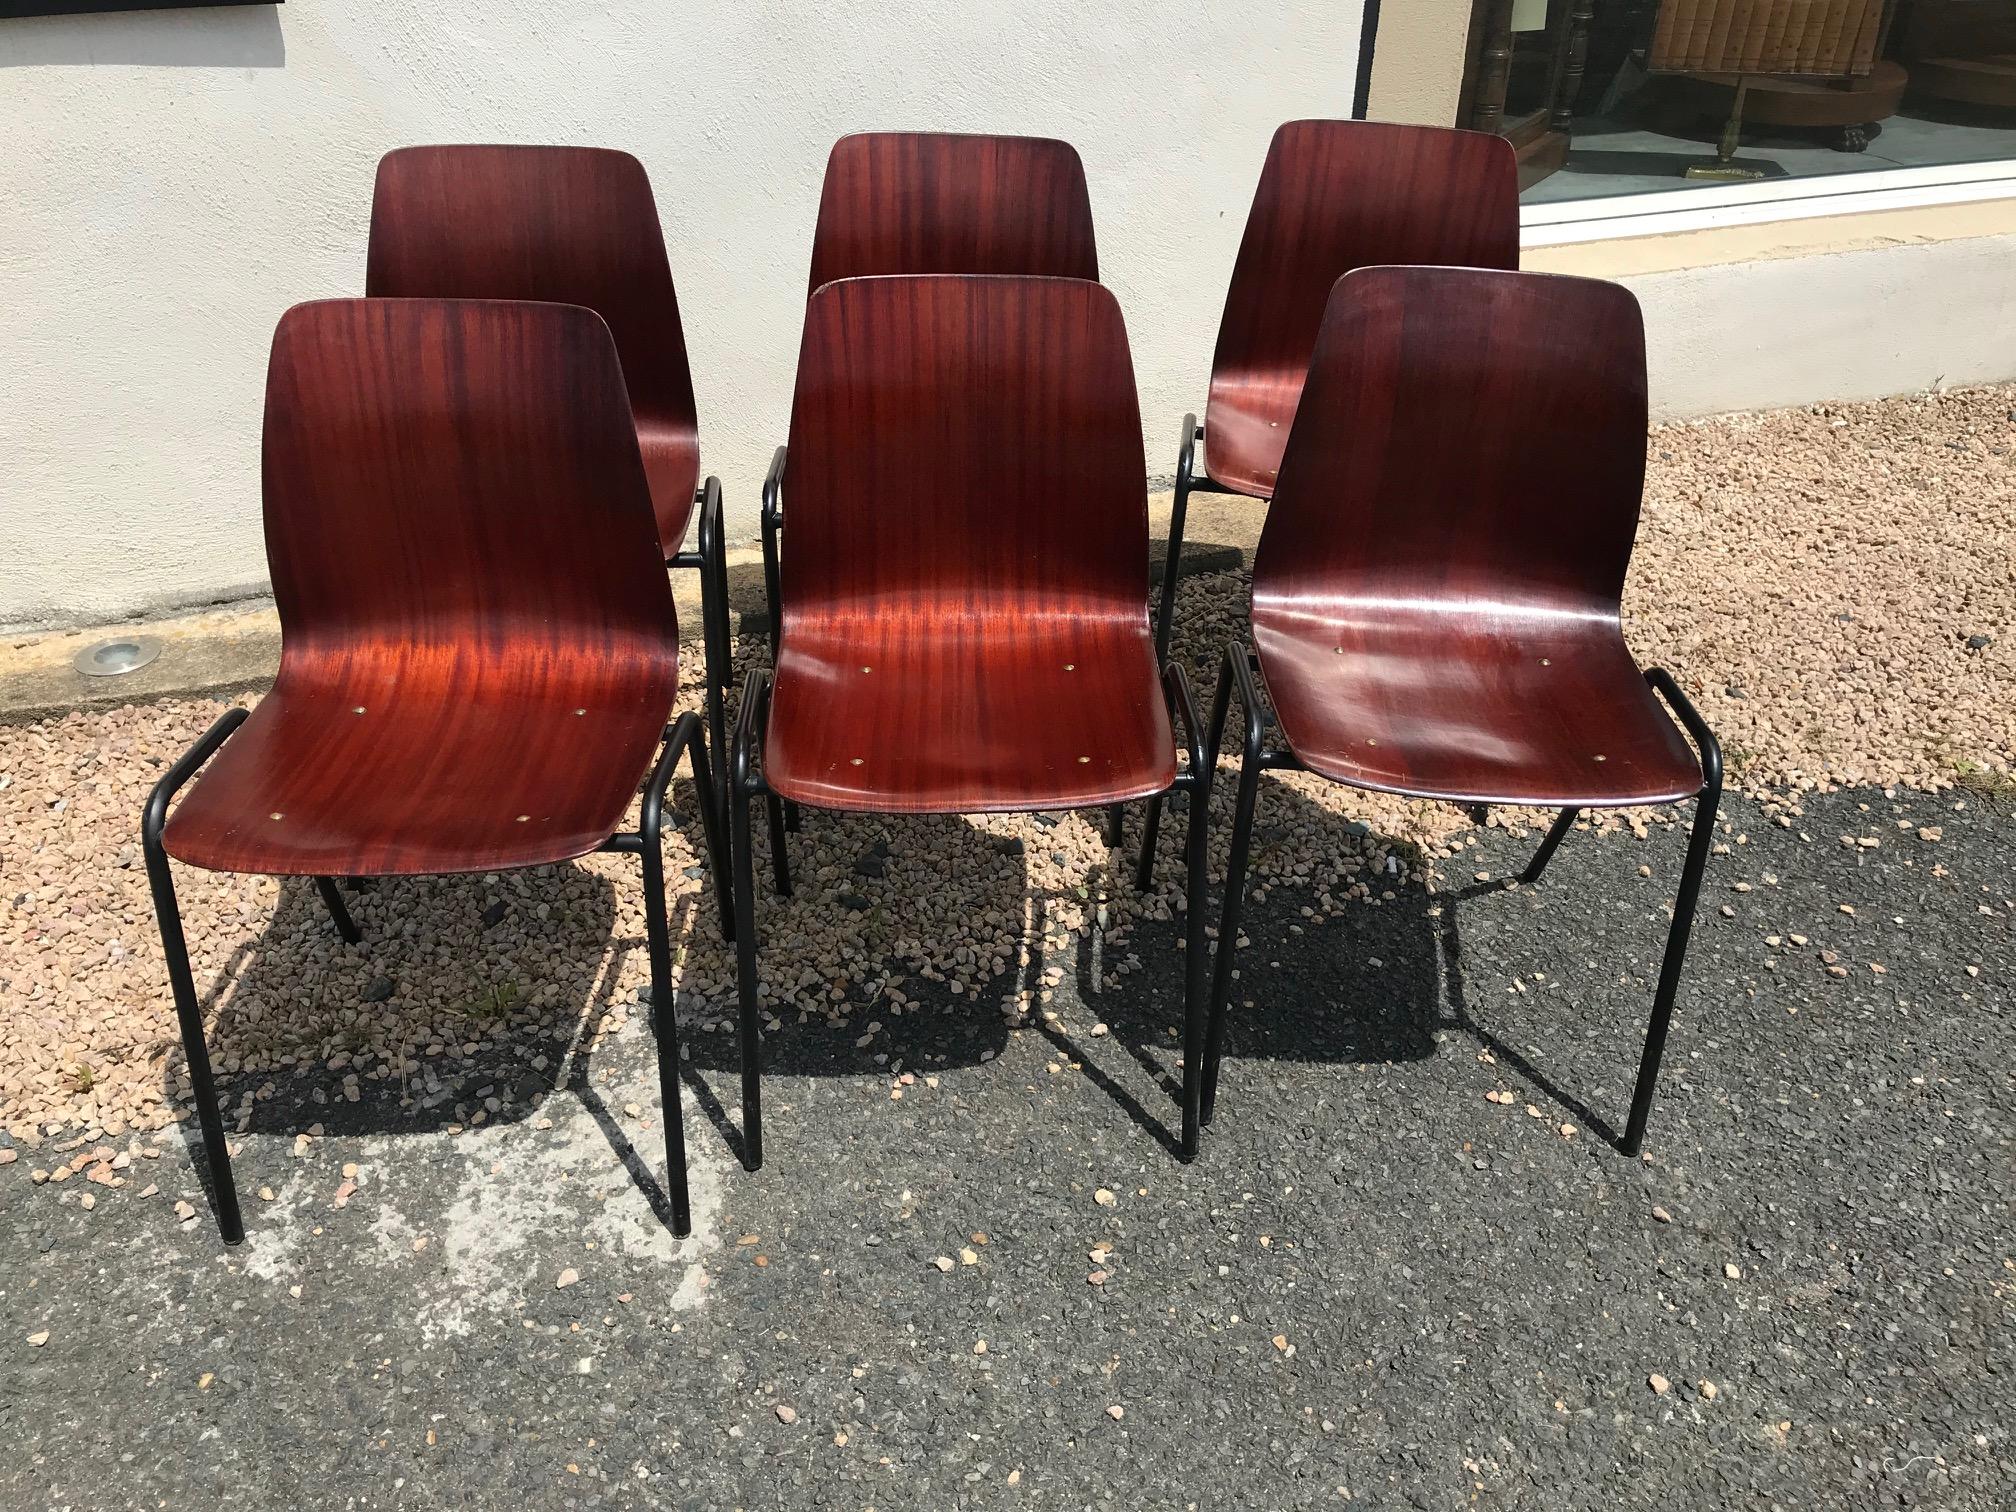 Set of 6 stackable pagholz Pagwood chairs origin, Germany, 1960s.
Post formed on a tubular brown metal base, a process that combines plywood and resin under pressure to obtain a result that is both flexible and solid.
Very resistant, this chair